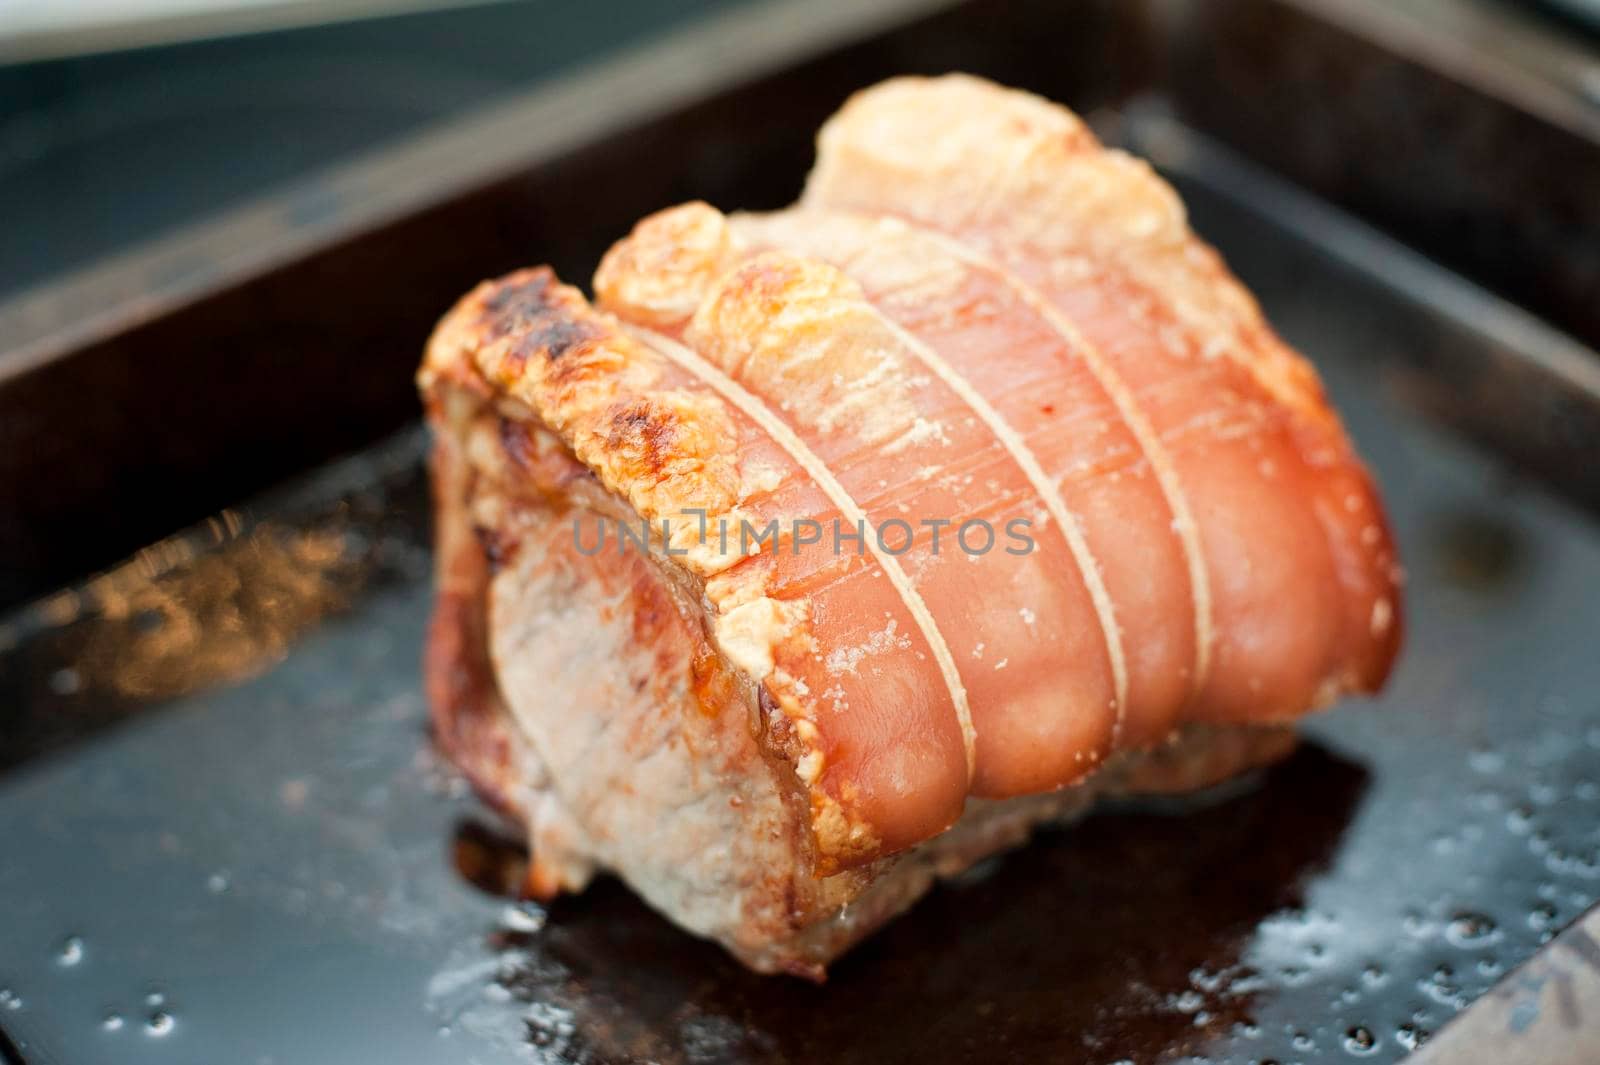 Crispy crackling on a cut of rolled roast pork in a grill pan, closeup view of the meat and the golden texture of the crackling